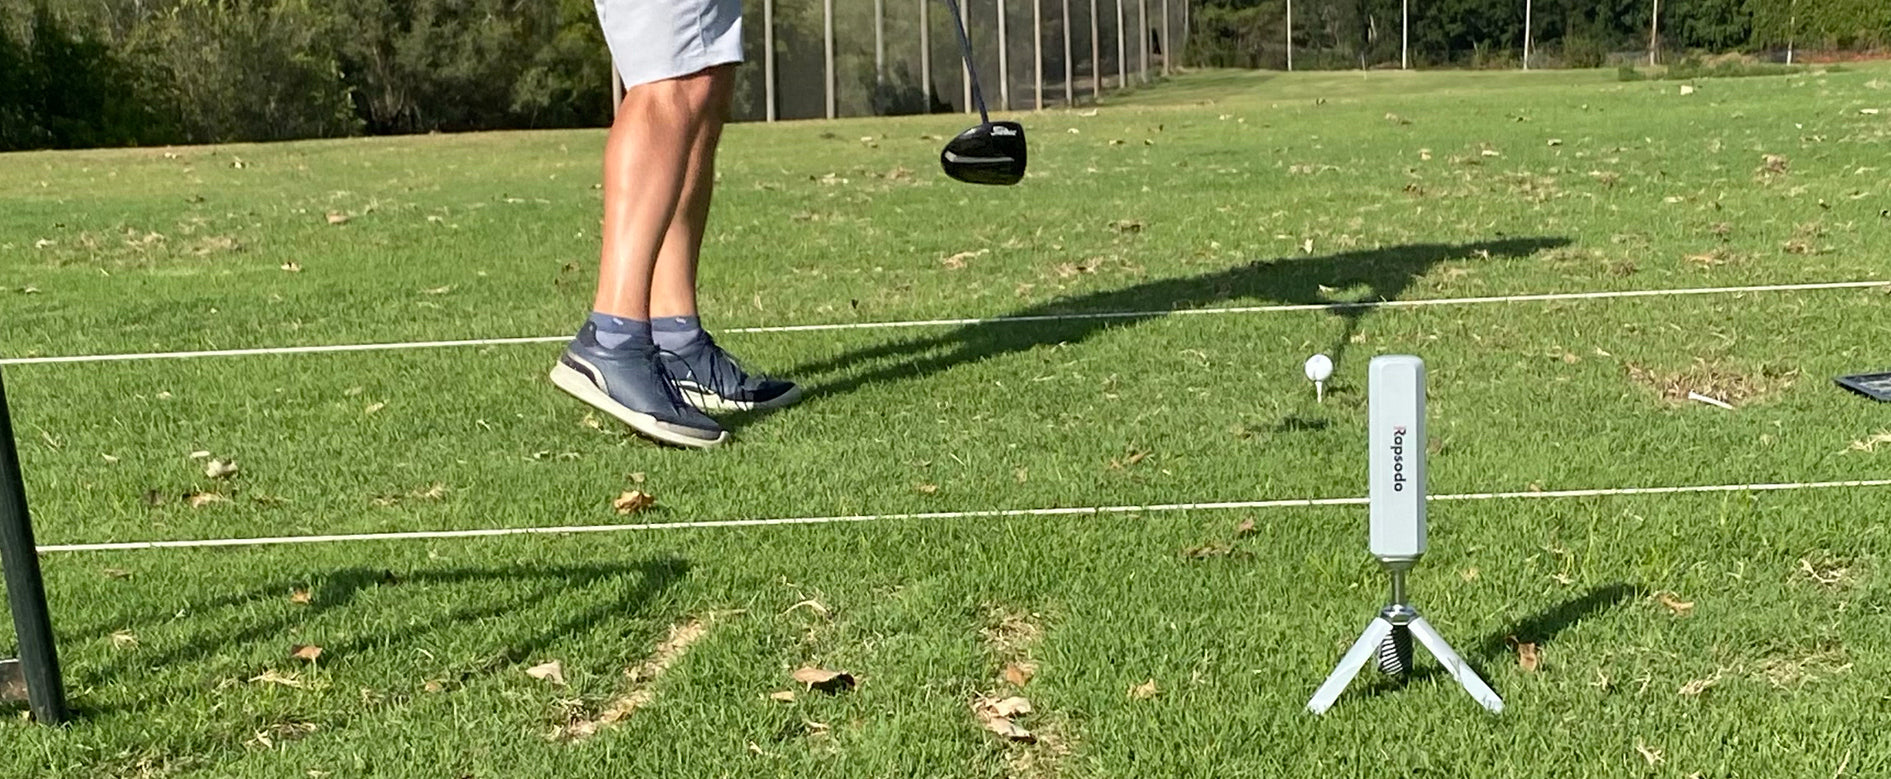 Legs of our golf guy, Marc, and the Rapsodo MLM2PRO during a swing at the golf range